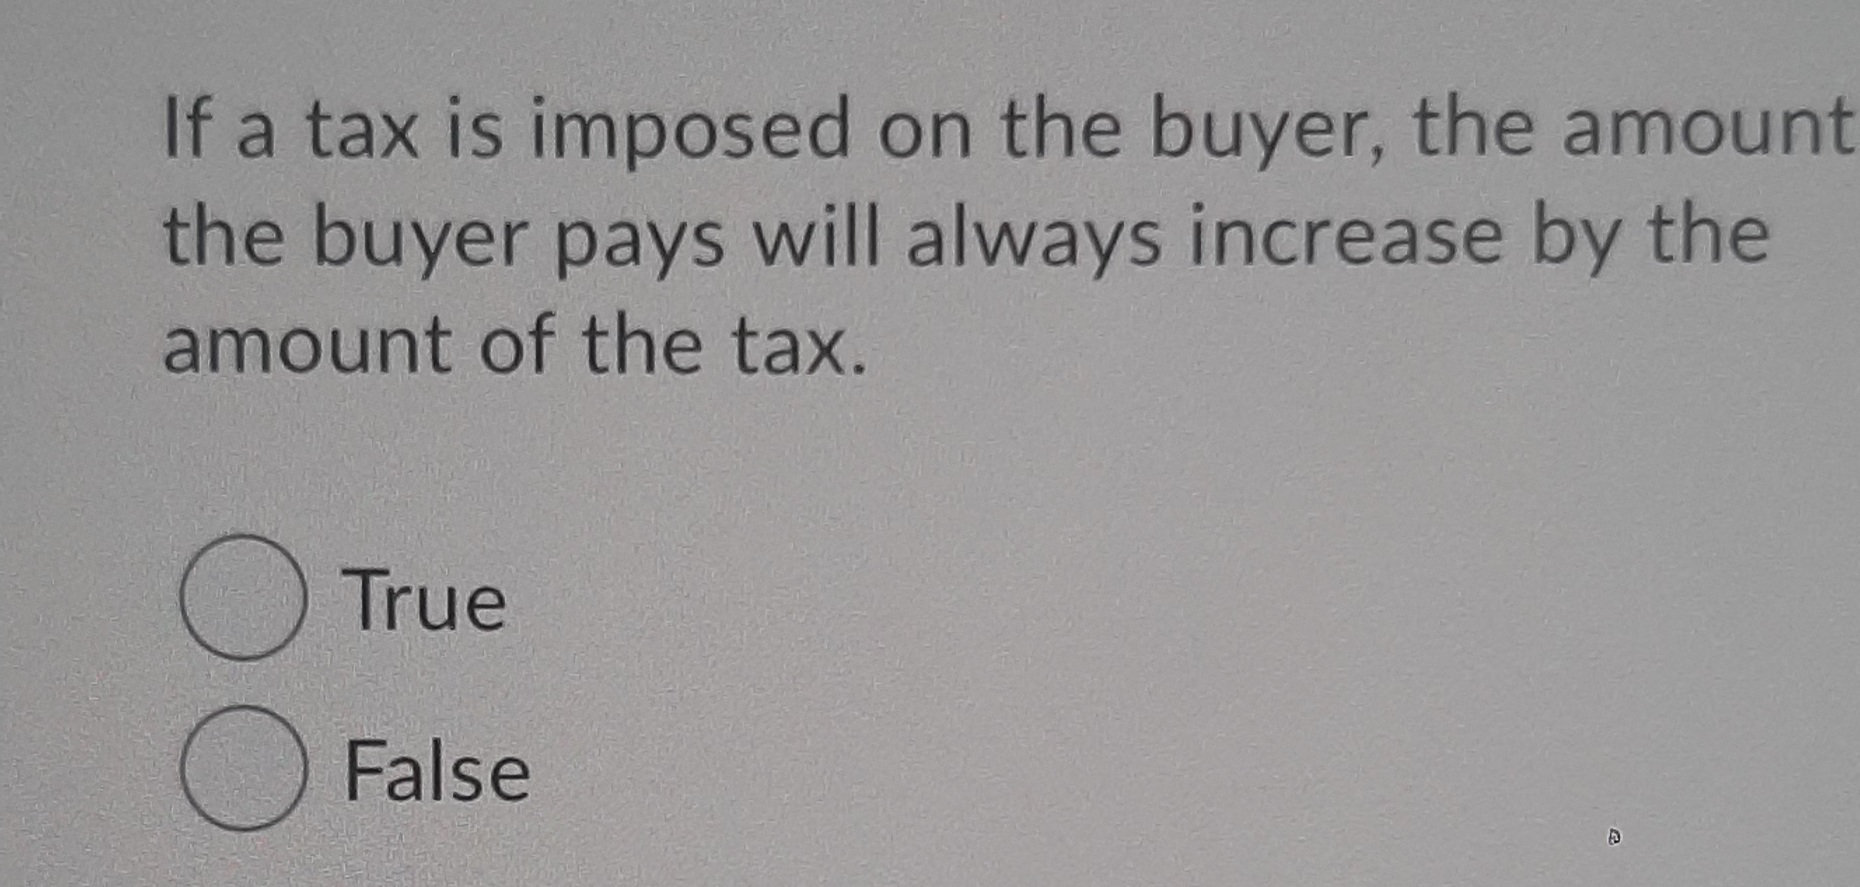 If a tax is imposed on the buyer, the amount
the buyer pays will always increase by the
amount of the tax.
()True
O False
